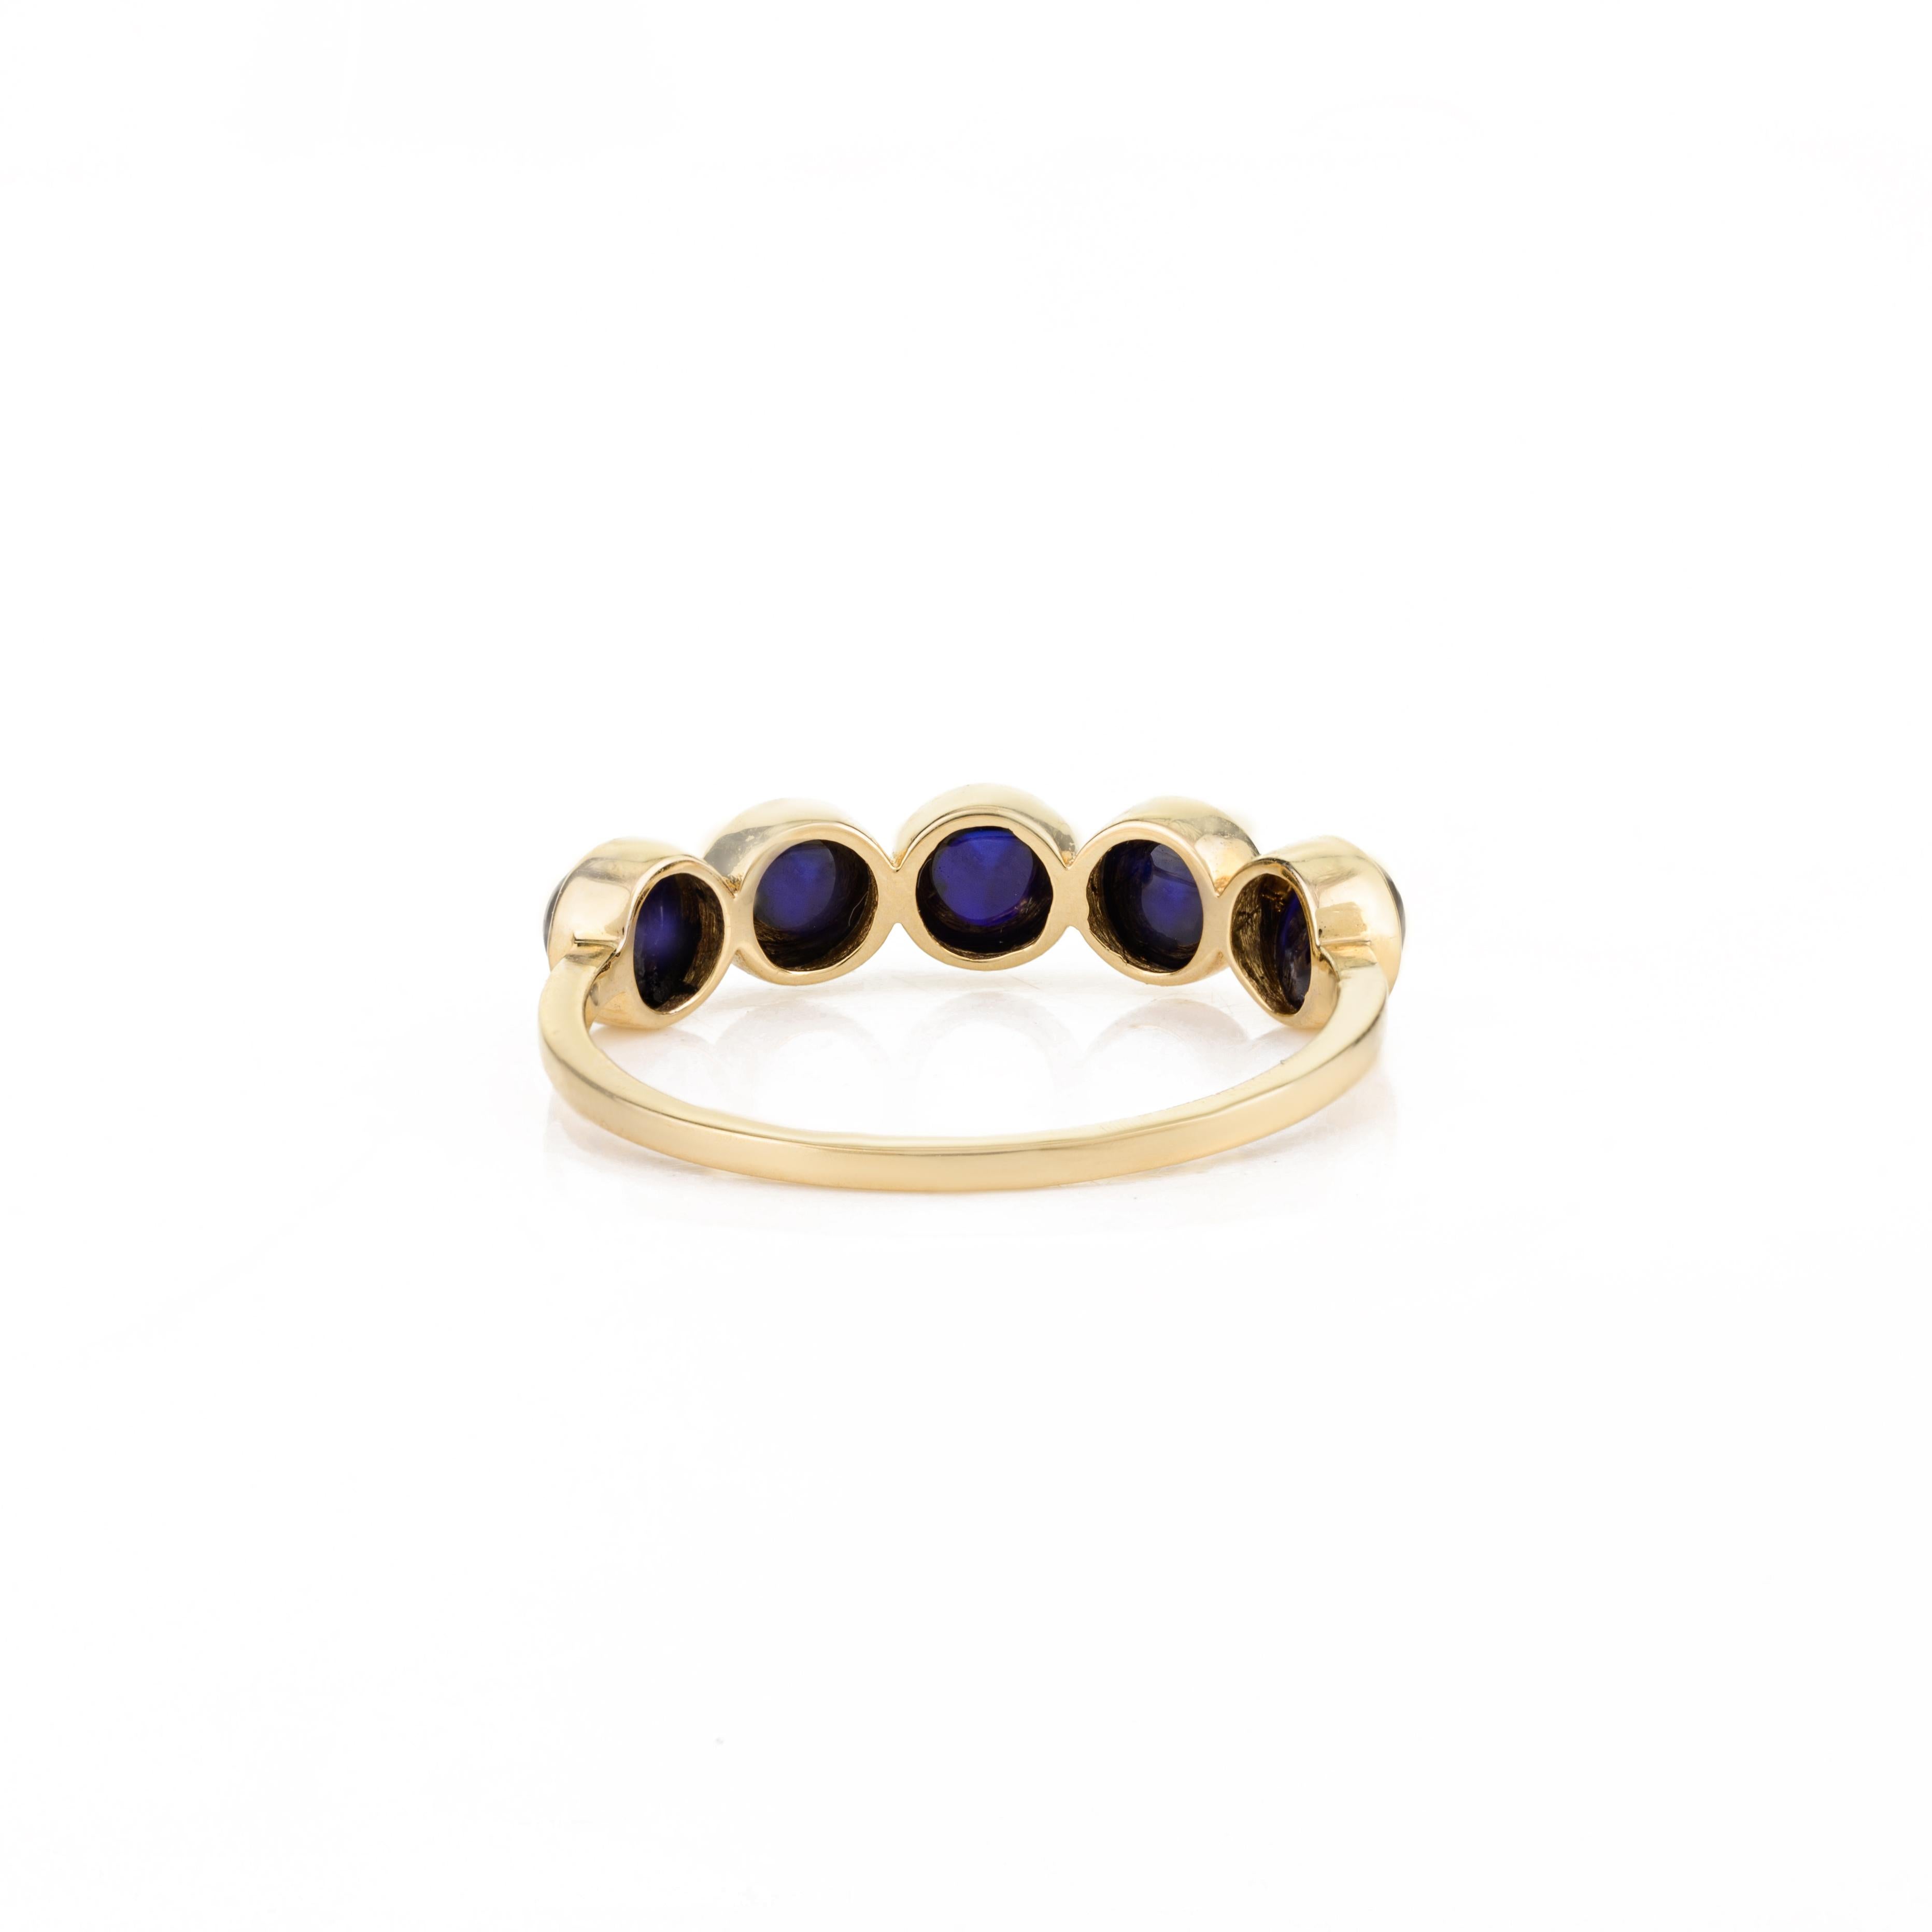 For Sale:  14k Solid Yellow Gold Round Cabochon Blue Sapphire Half Eternity Band Ring 5